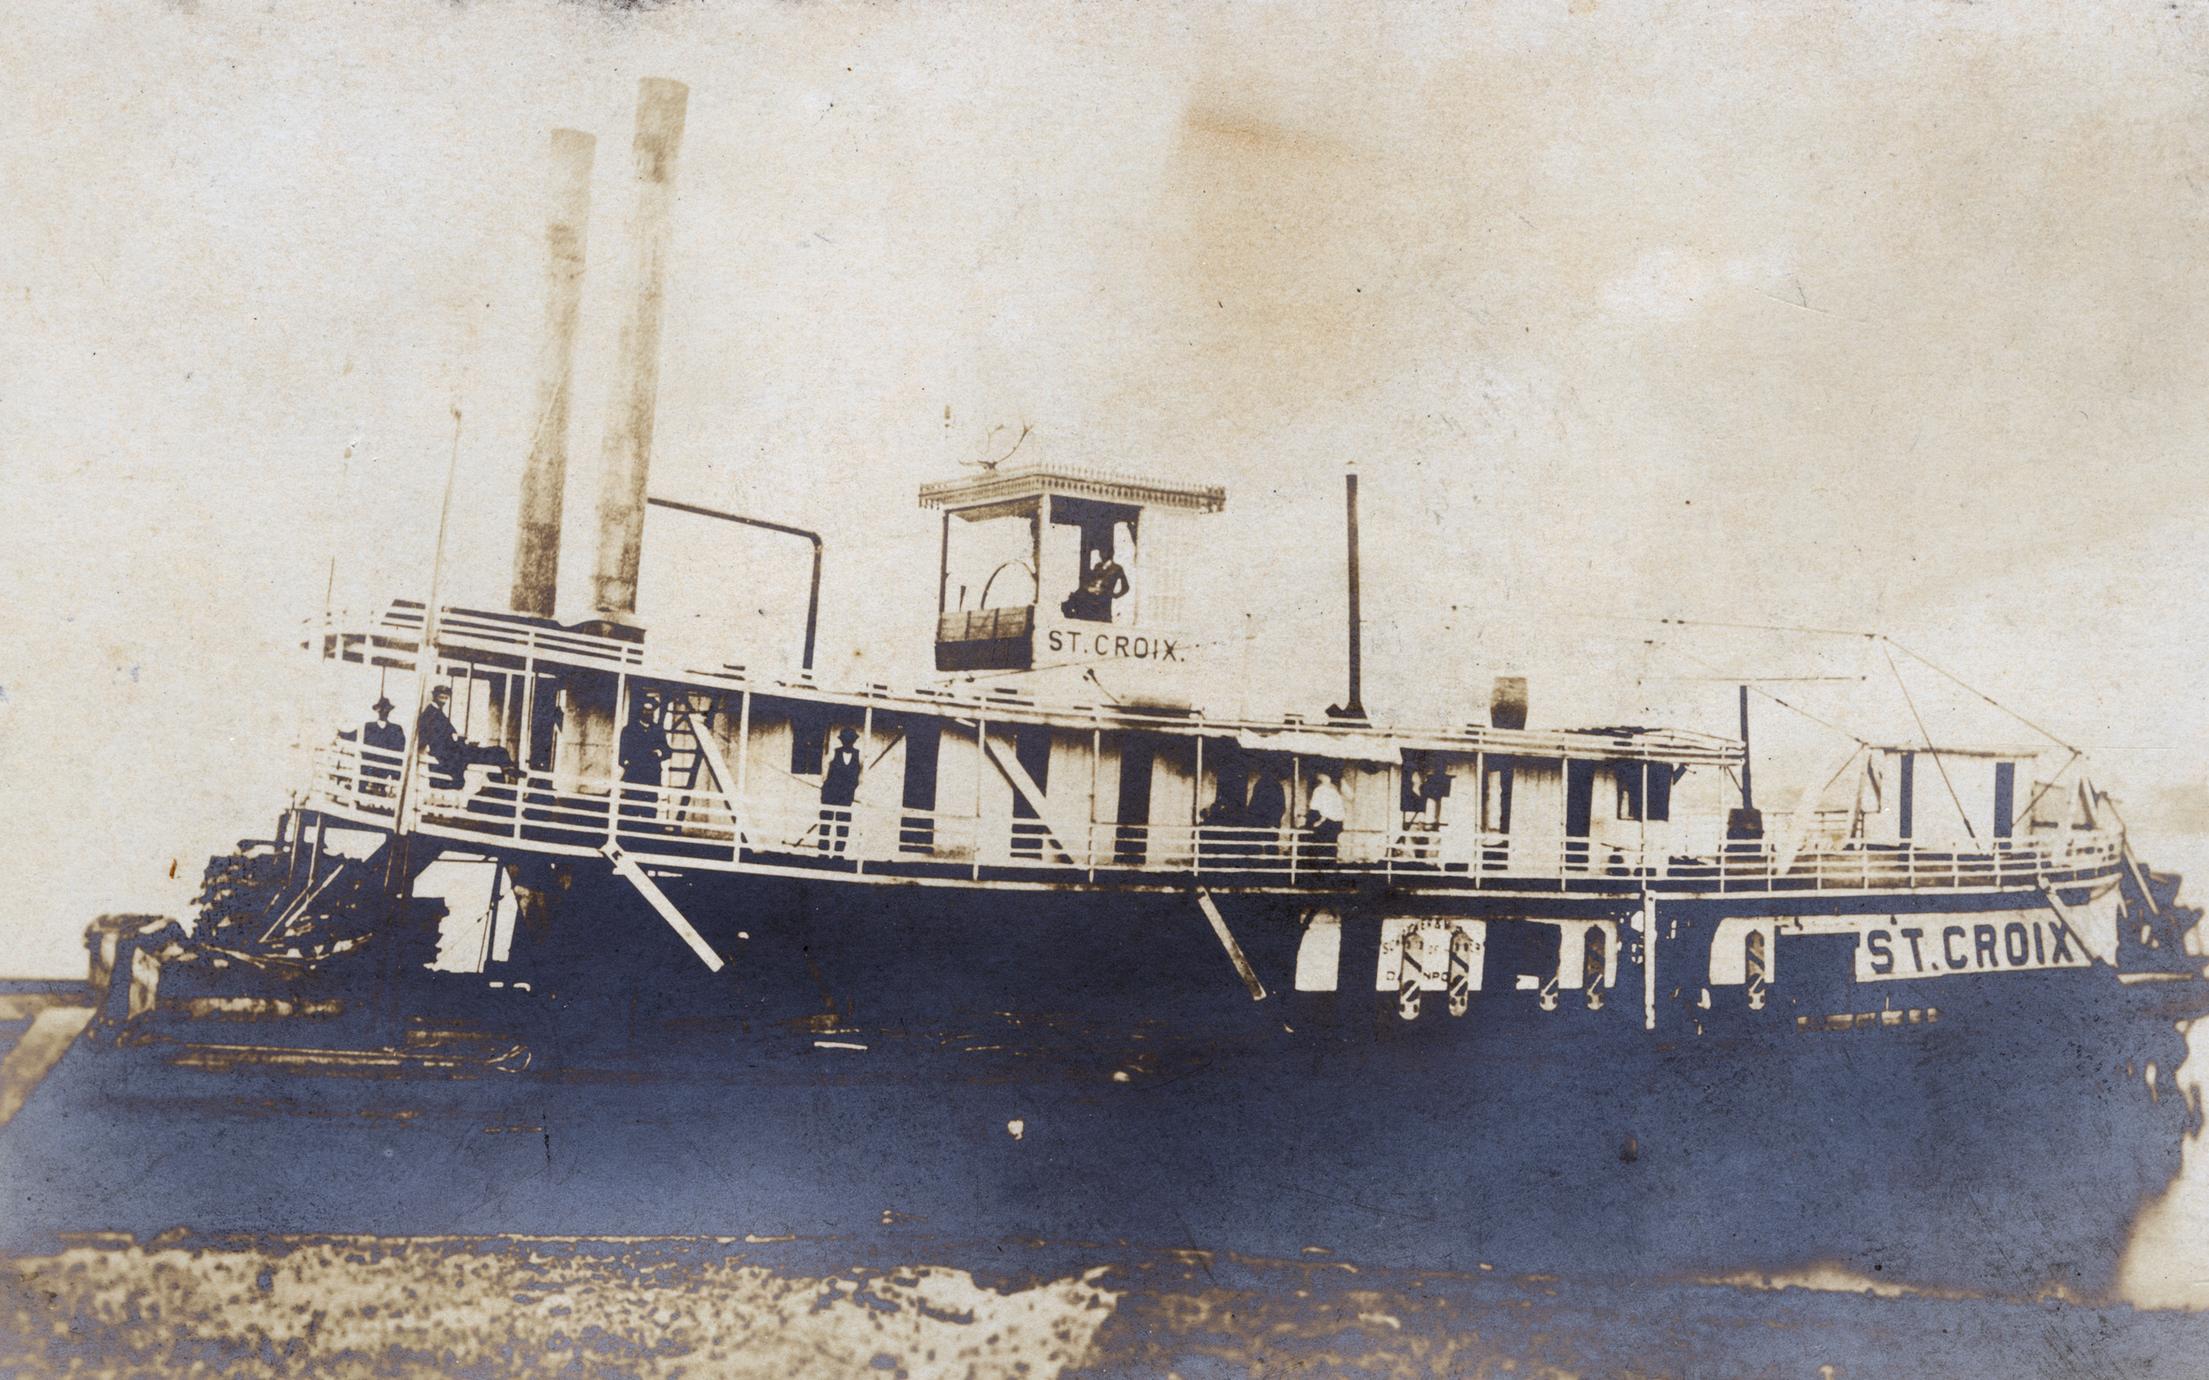 St. Croix (Packet/Rafter/Towboat, 1870-1894)